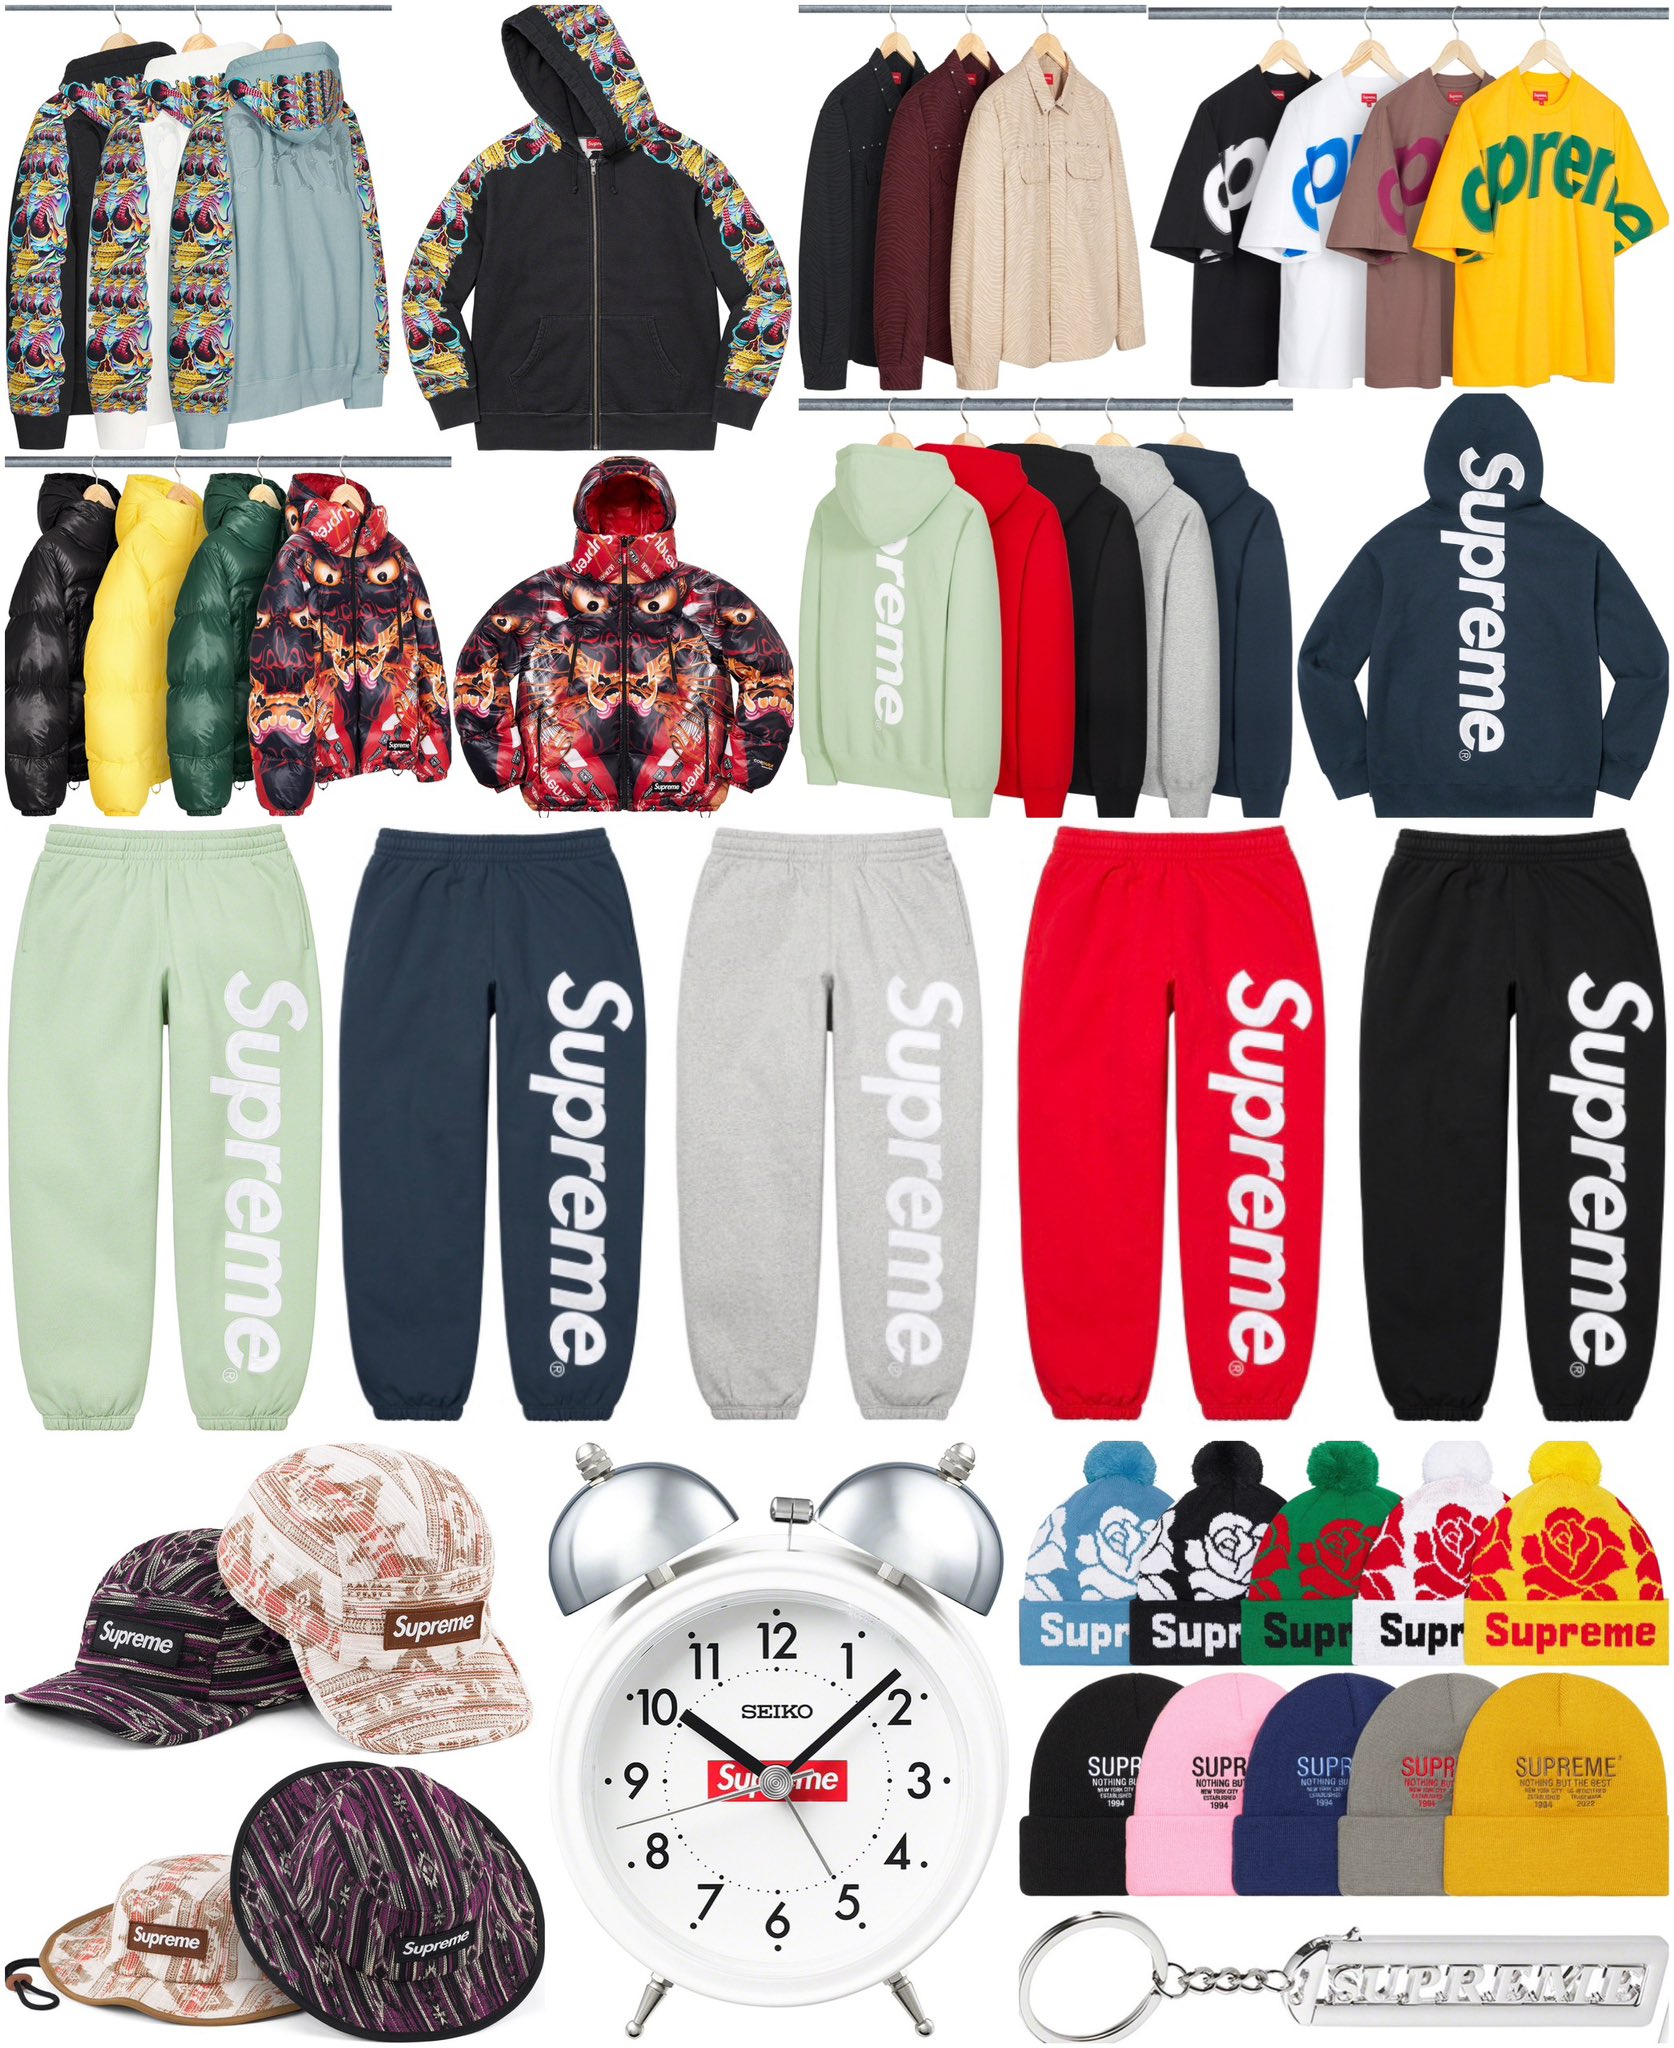 DropsByJay on Instagram: Supreme Week 7 Droplist Dickies, Rhino Trunk,  Espresso Cups and more set to release in store and online this Thursday,  April 7th. Stay tuned for retails and additional updates